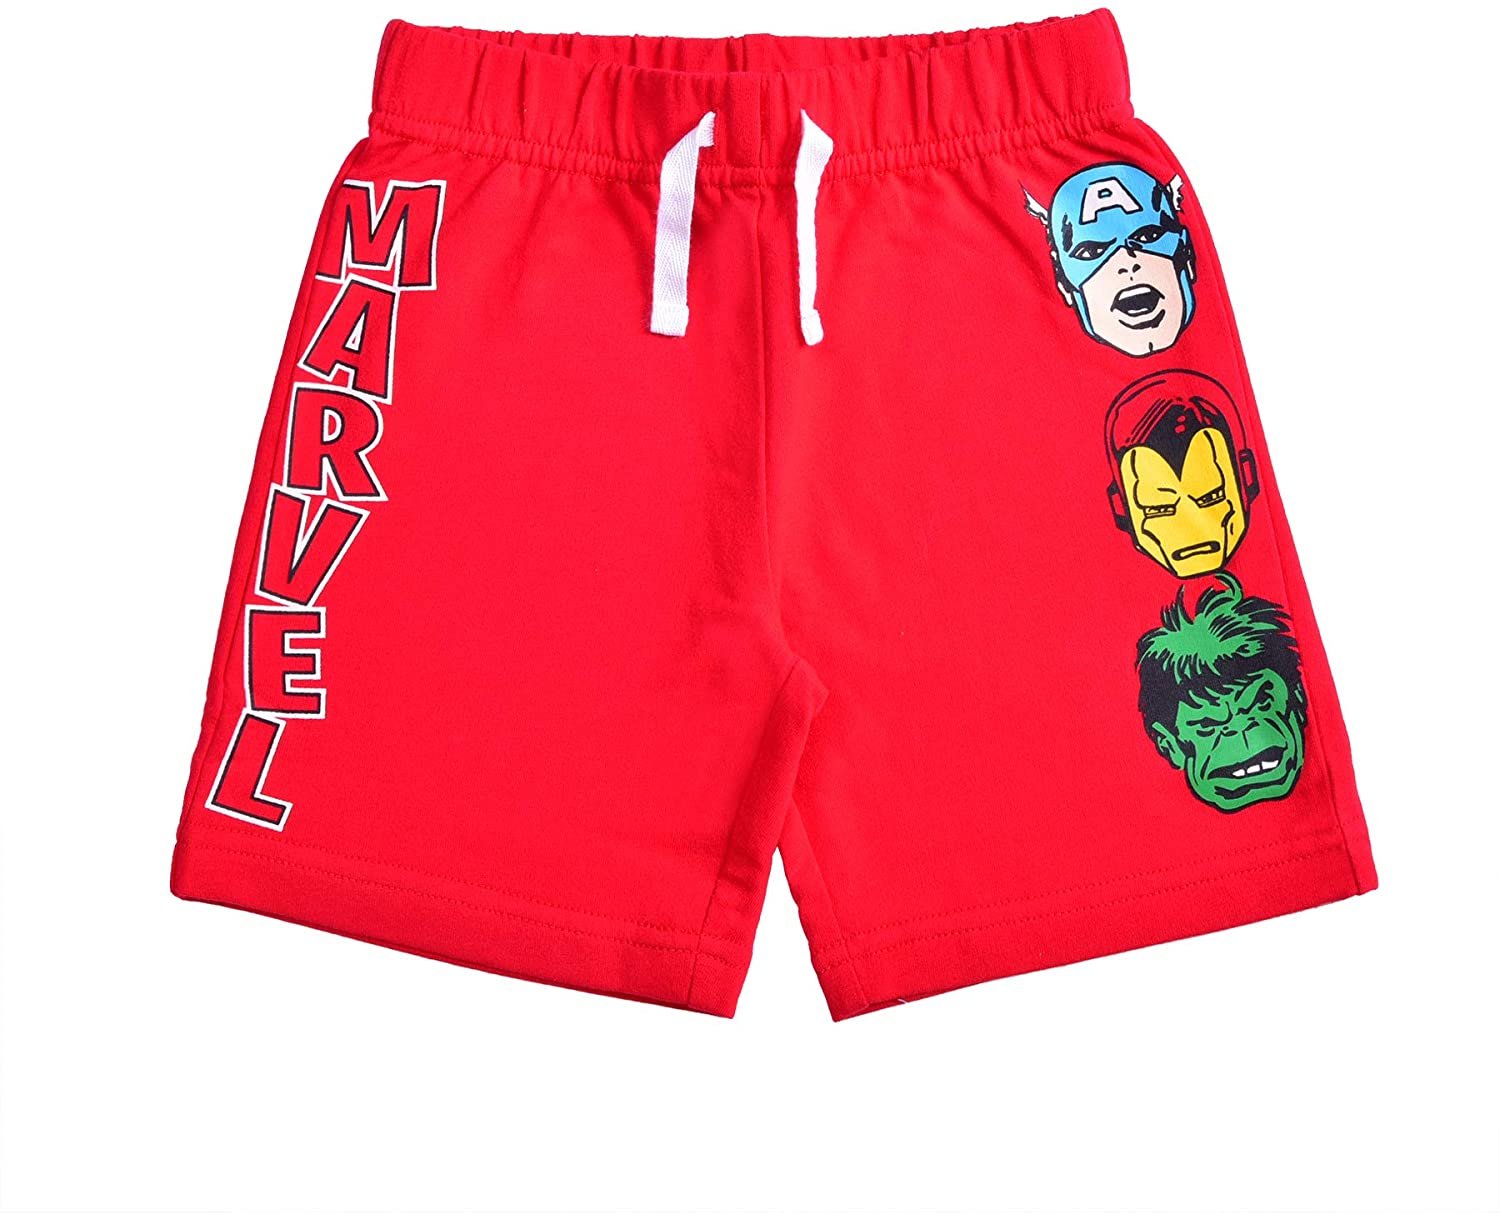 Marvel Superheroes 2 Pack Shorts Set for Boys, Ironman, Hulk and Captain America - image 3 of 5